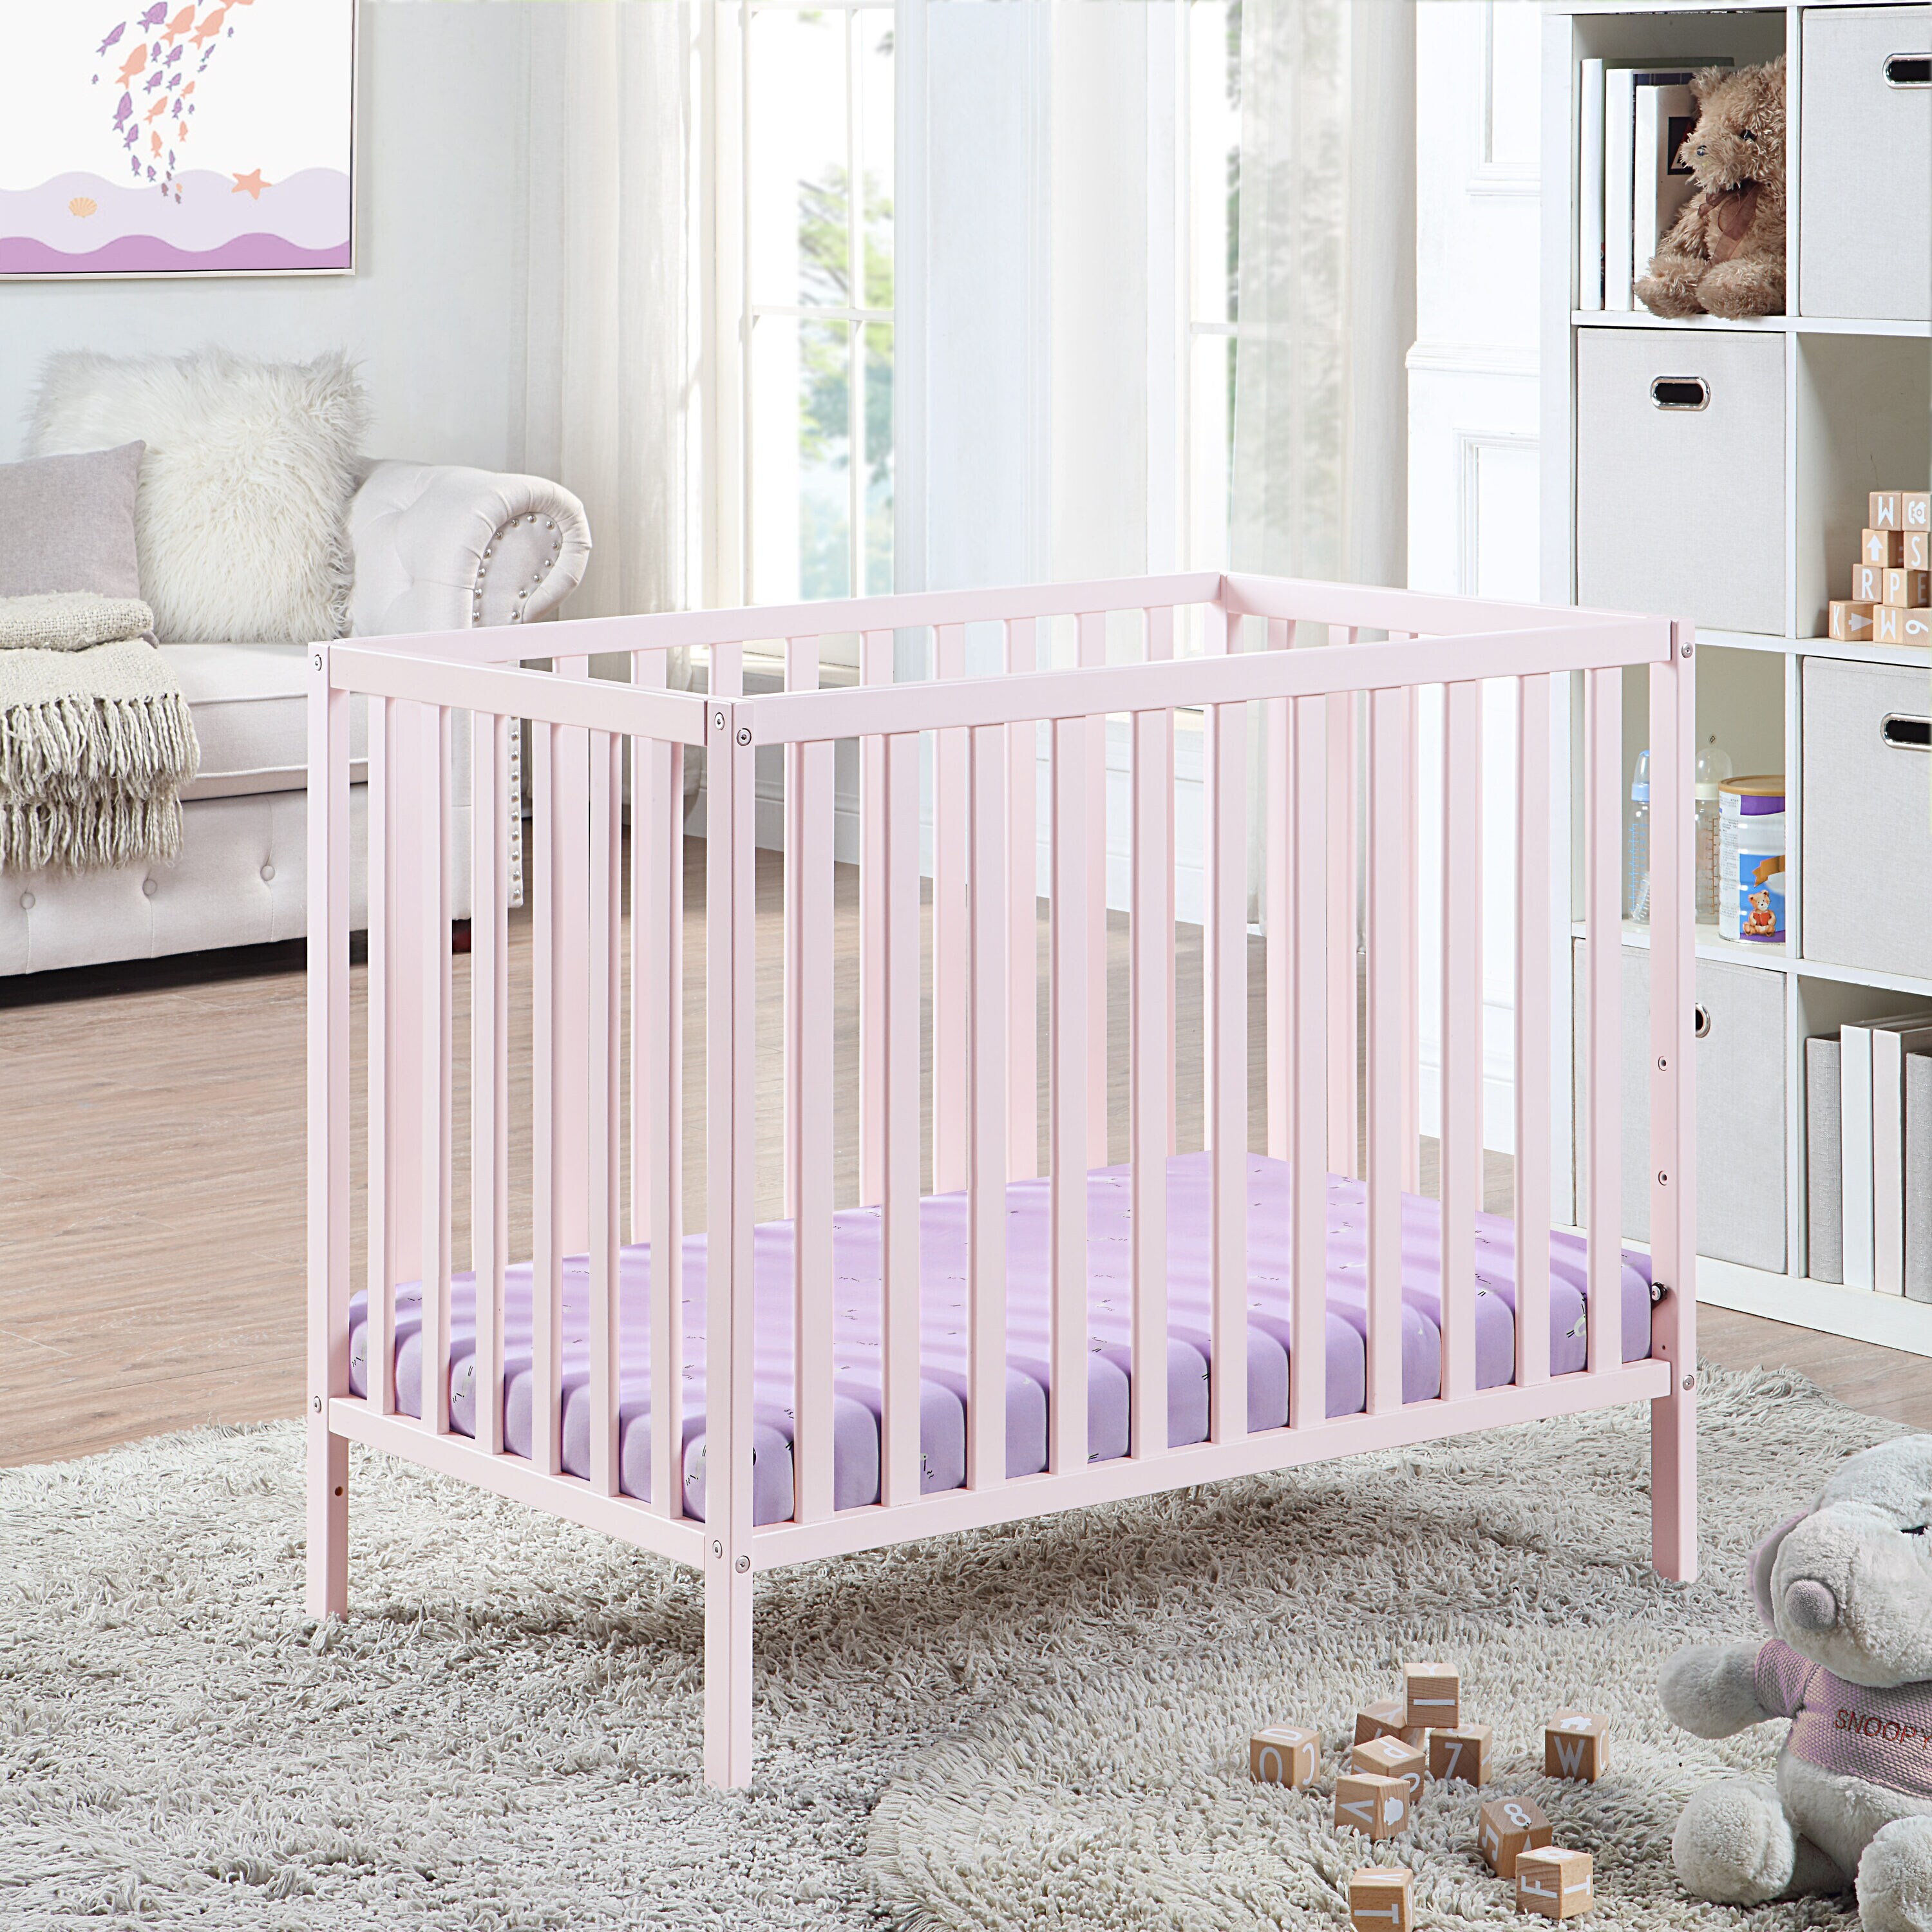 Palmer 3-in-1 Mini Crib in Pink | Converts to Full Bed | Easy Assembly | Non-Toxic Finish | JPMA Certified | CPSC Approved | - Suite Bebe 25199-PPK